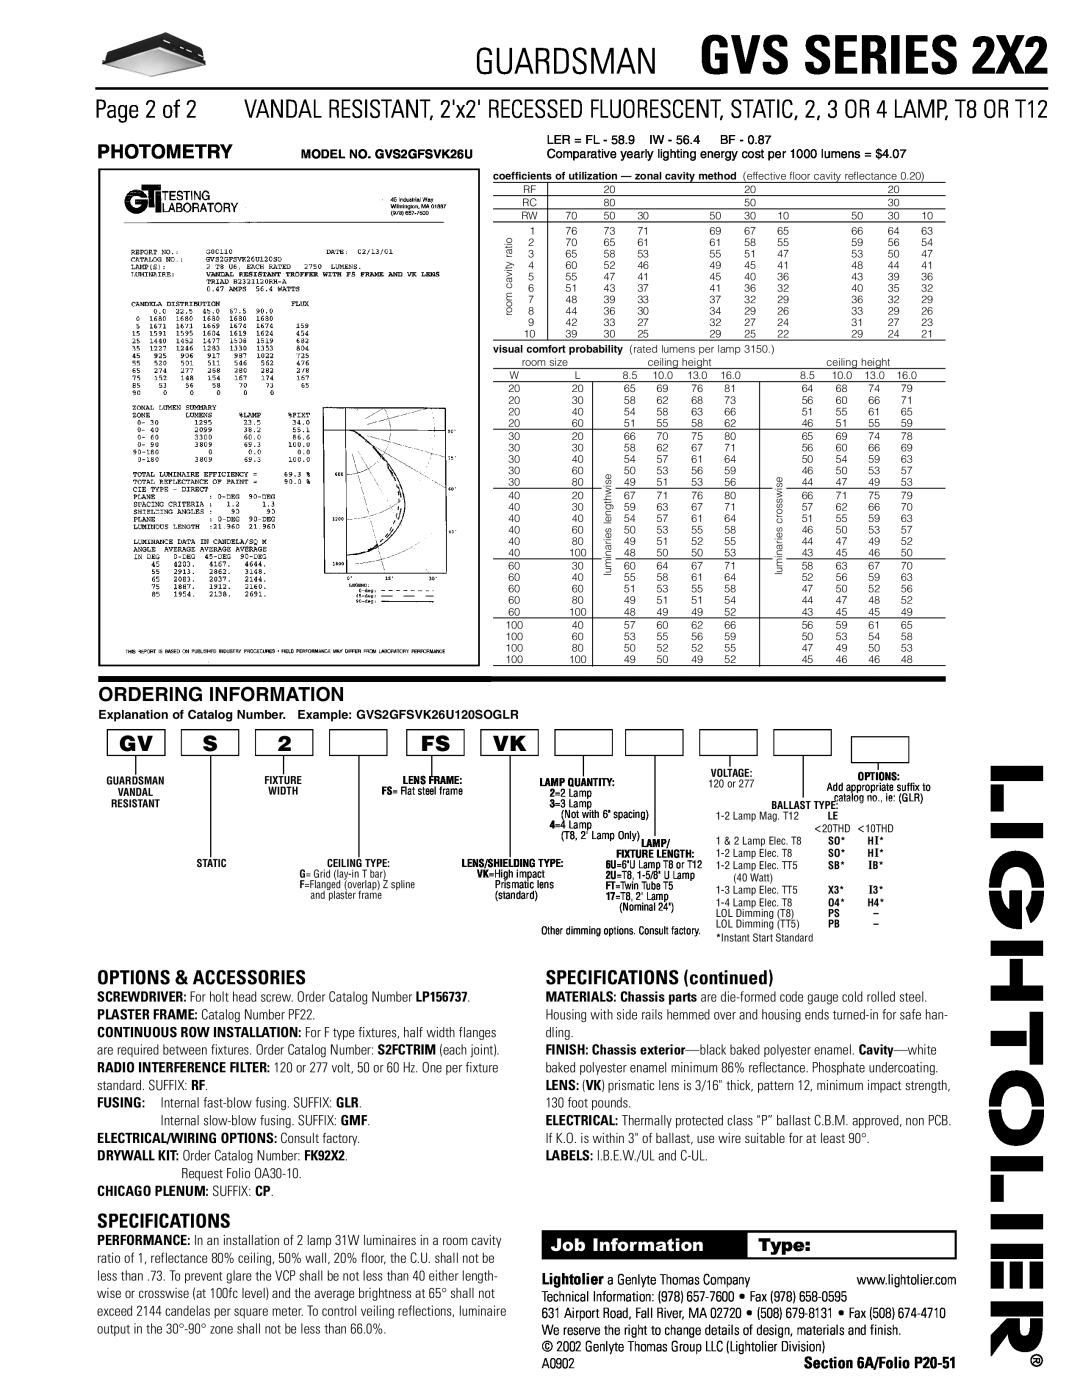 Lightolier GVS SERIES 2X2 Photometry, Ordering Information, Options & Accessories, Specifications, Guardsman Gvs Series 